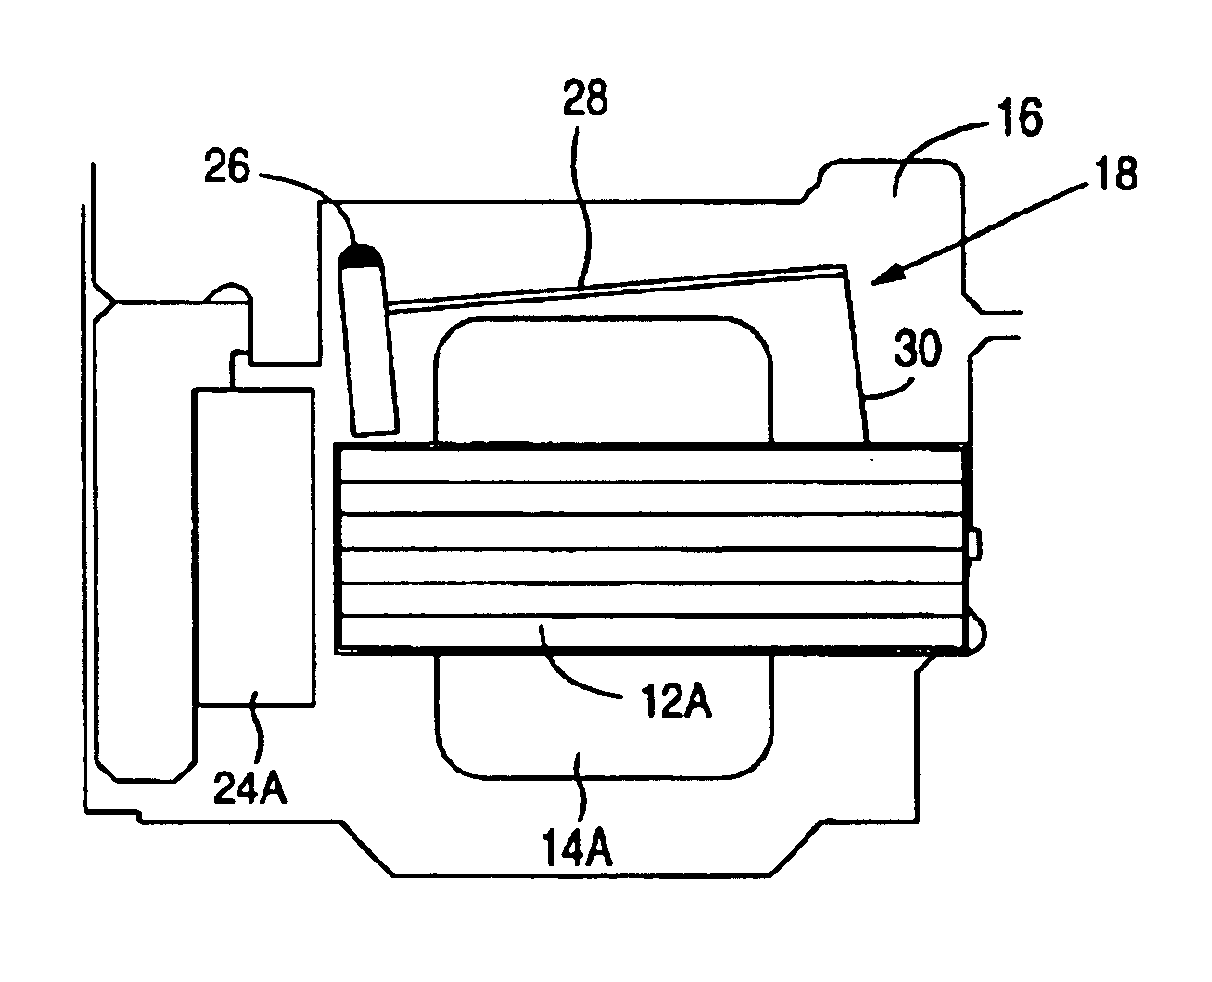 Disk drive employing a spindle motor comprising a locking spring arm disengaged through stator coil flux